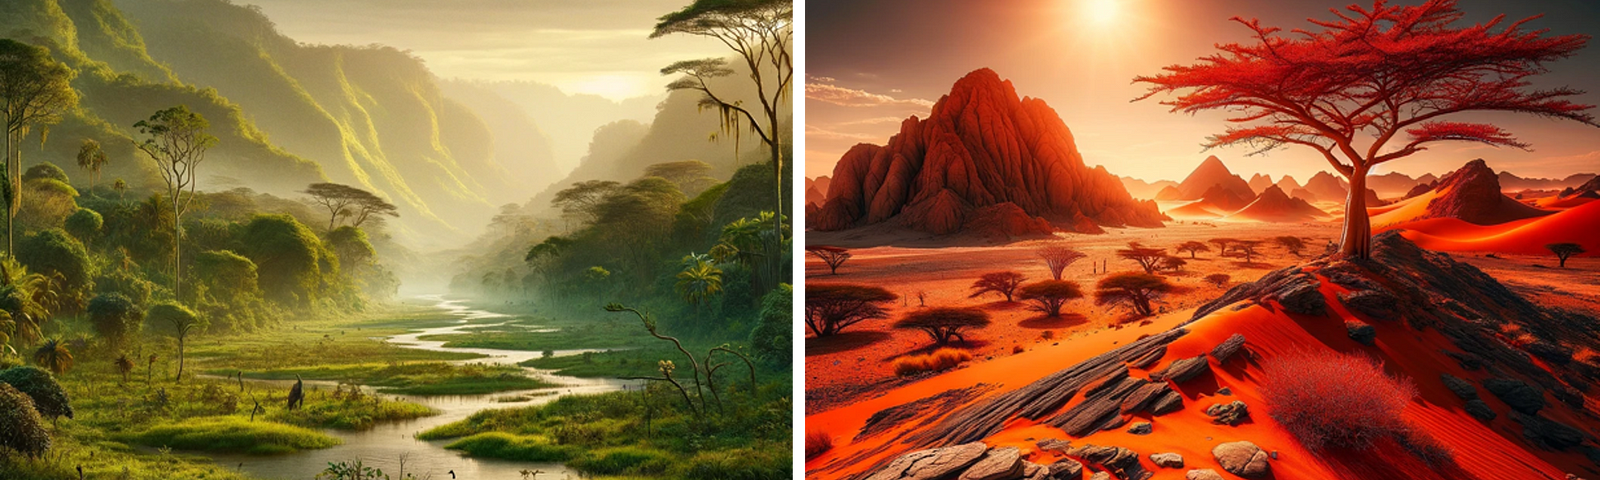 Image created by the Editor via DALL-E 3: A contrasting dual vision of rural Mozambique: 1) The lush tropical environment between the Save and Limpopo rivers, vibrant with the region’s rich biodiversity. 2) A dramatic and desolate landscape, marked by solitary baobab and tamarind trees, capturing the tragic beauty and resilience of nature.